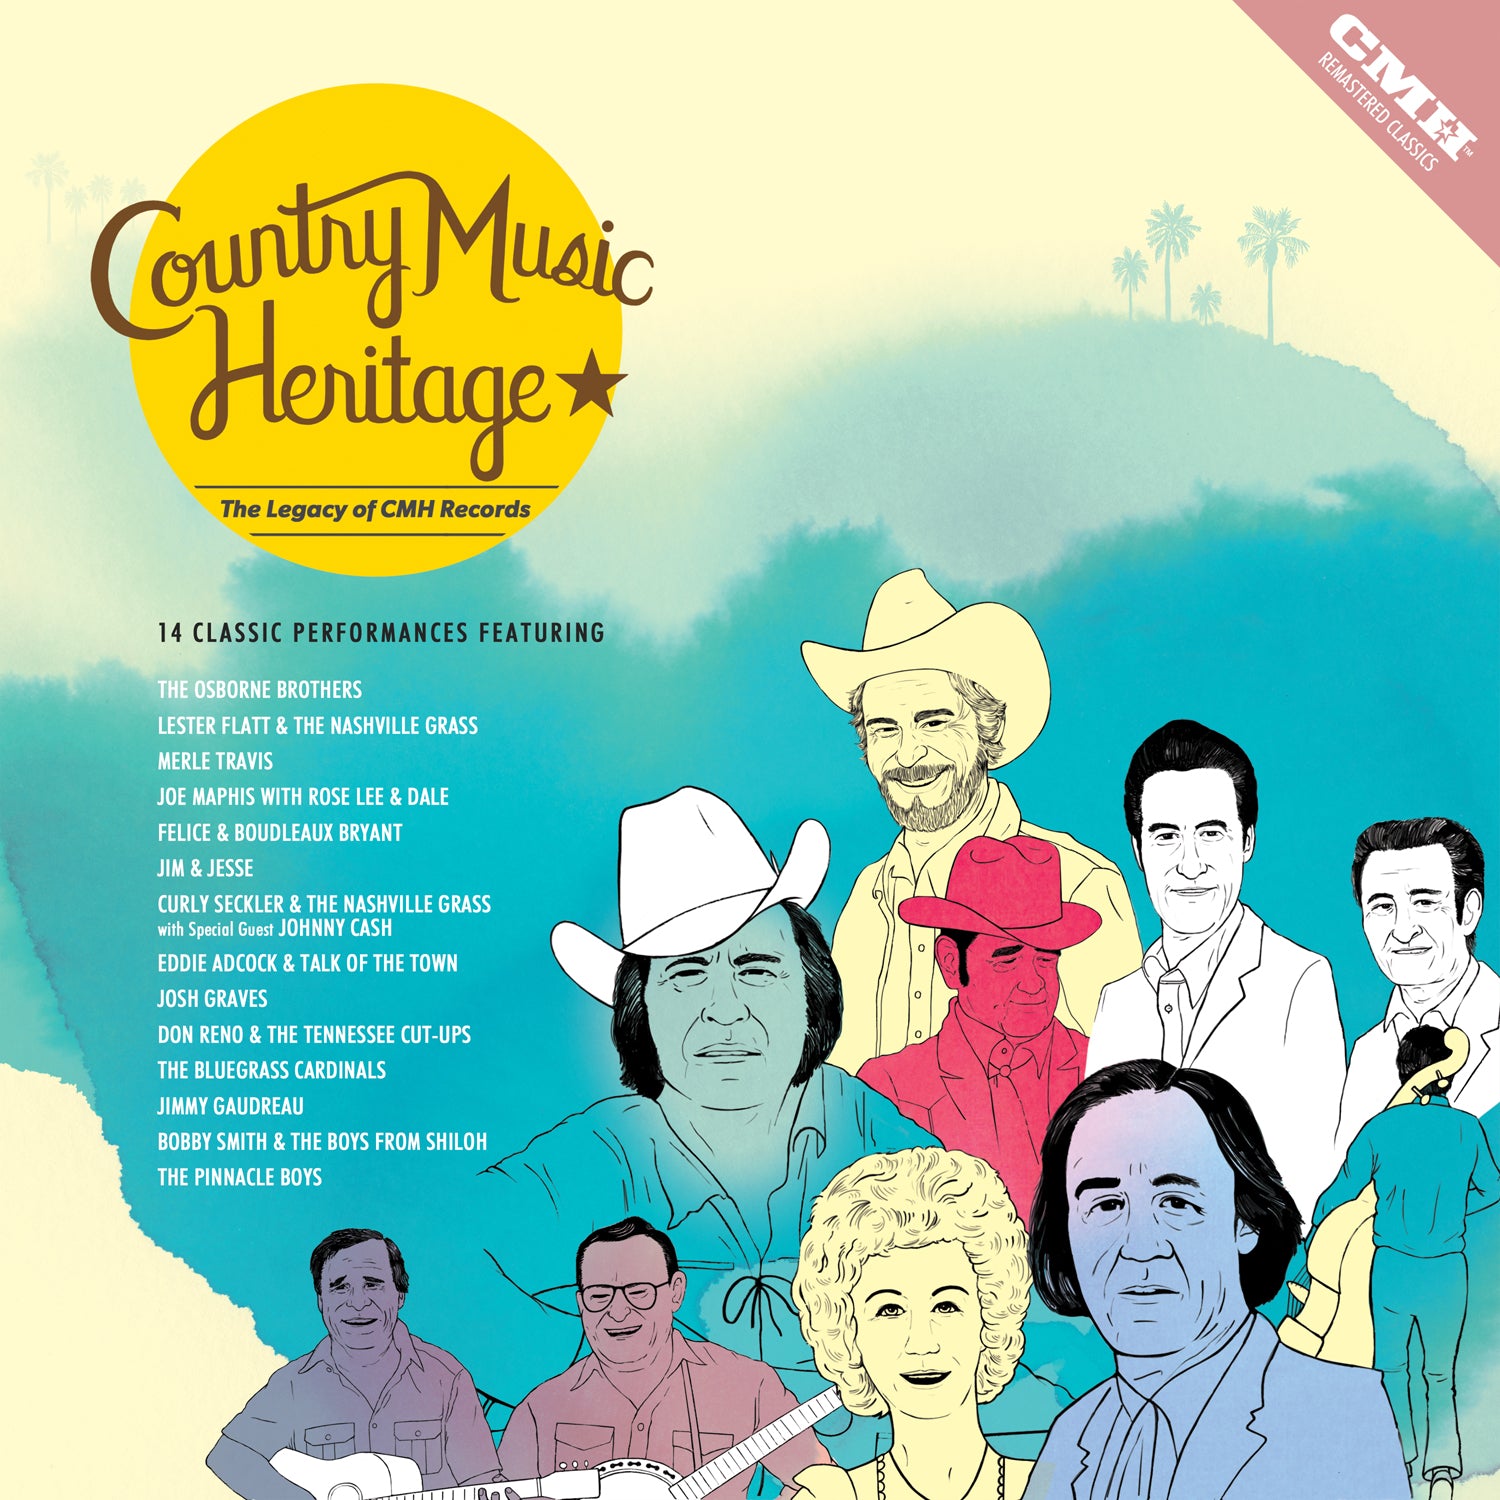 Country Music Heritage: The Legacy of CMH Records